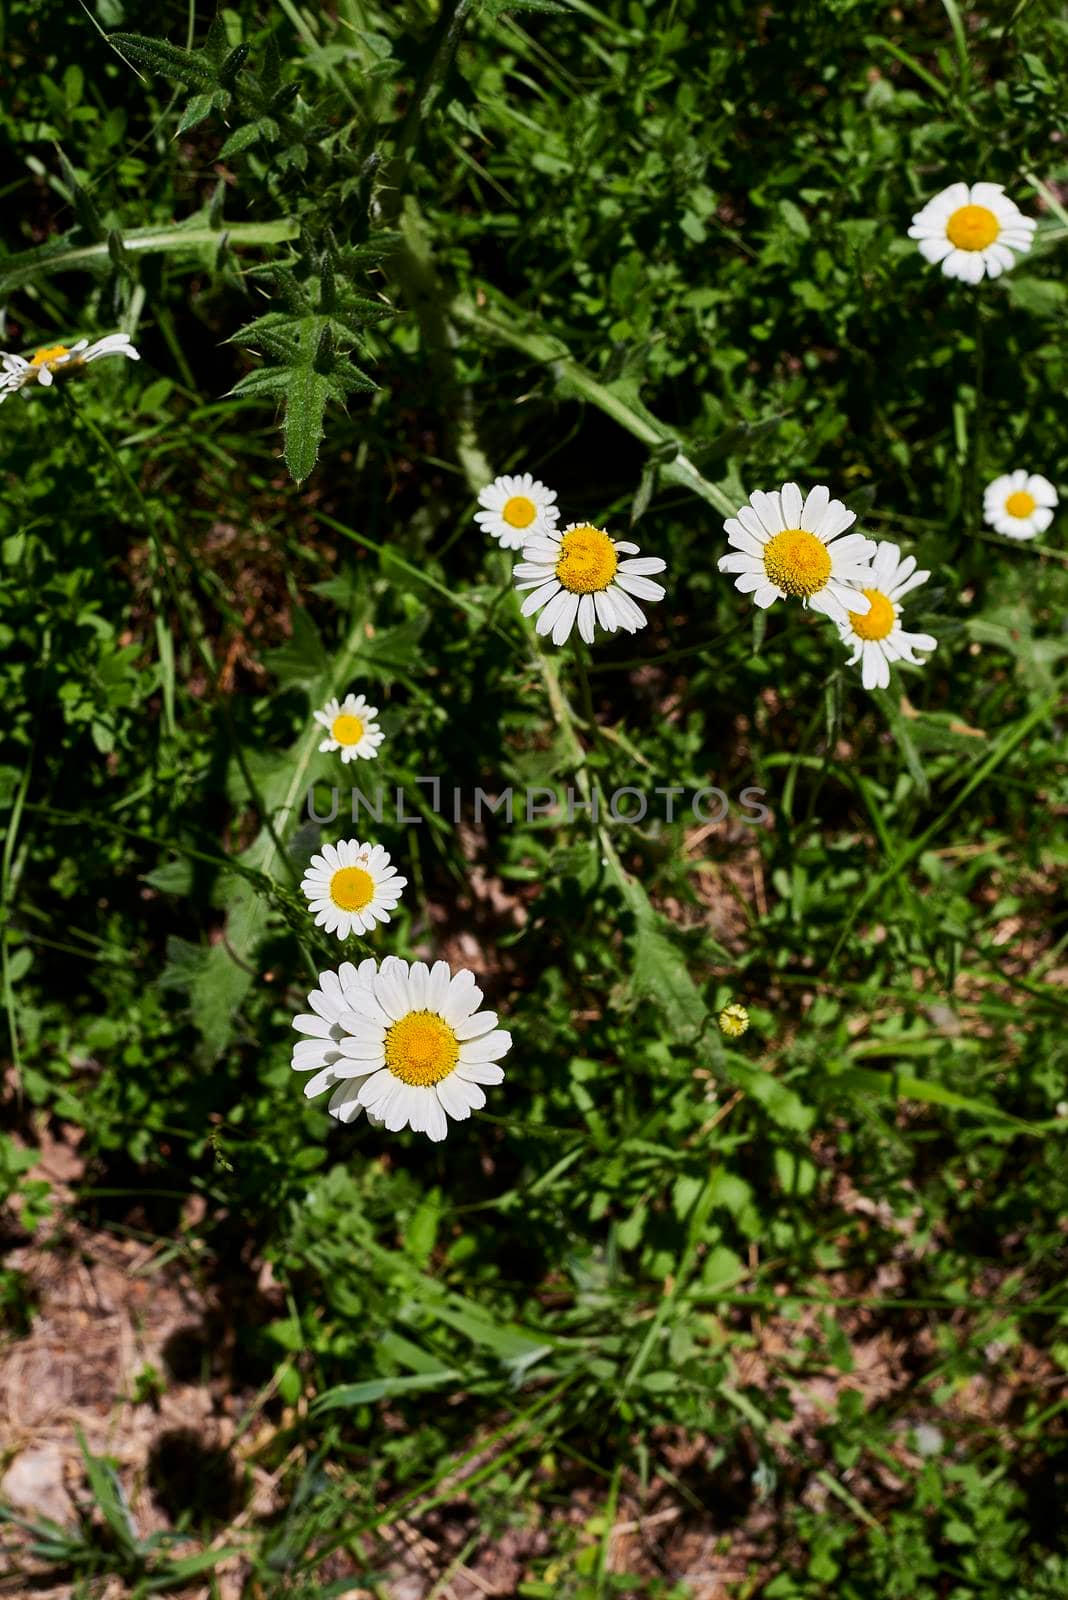 A group of flowers, daisies by raul_ruiz